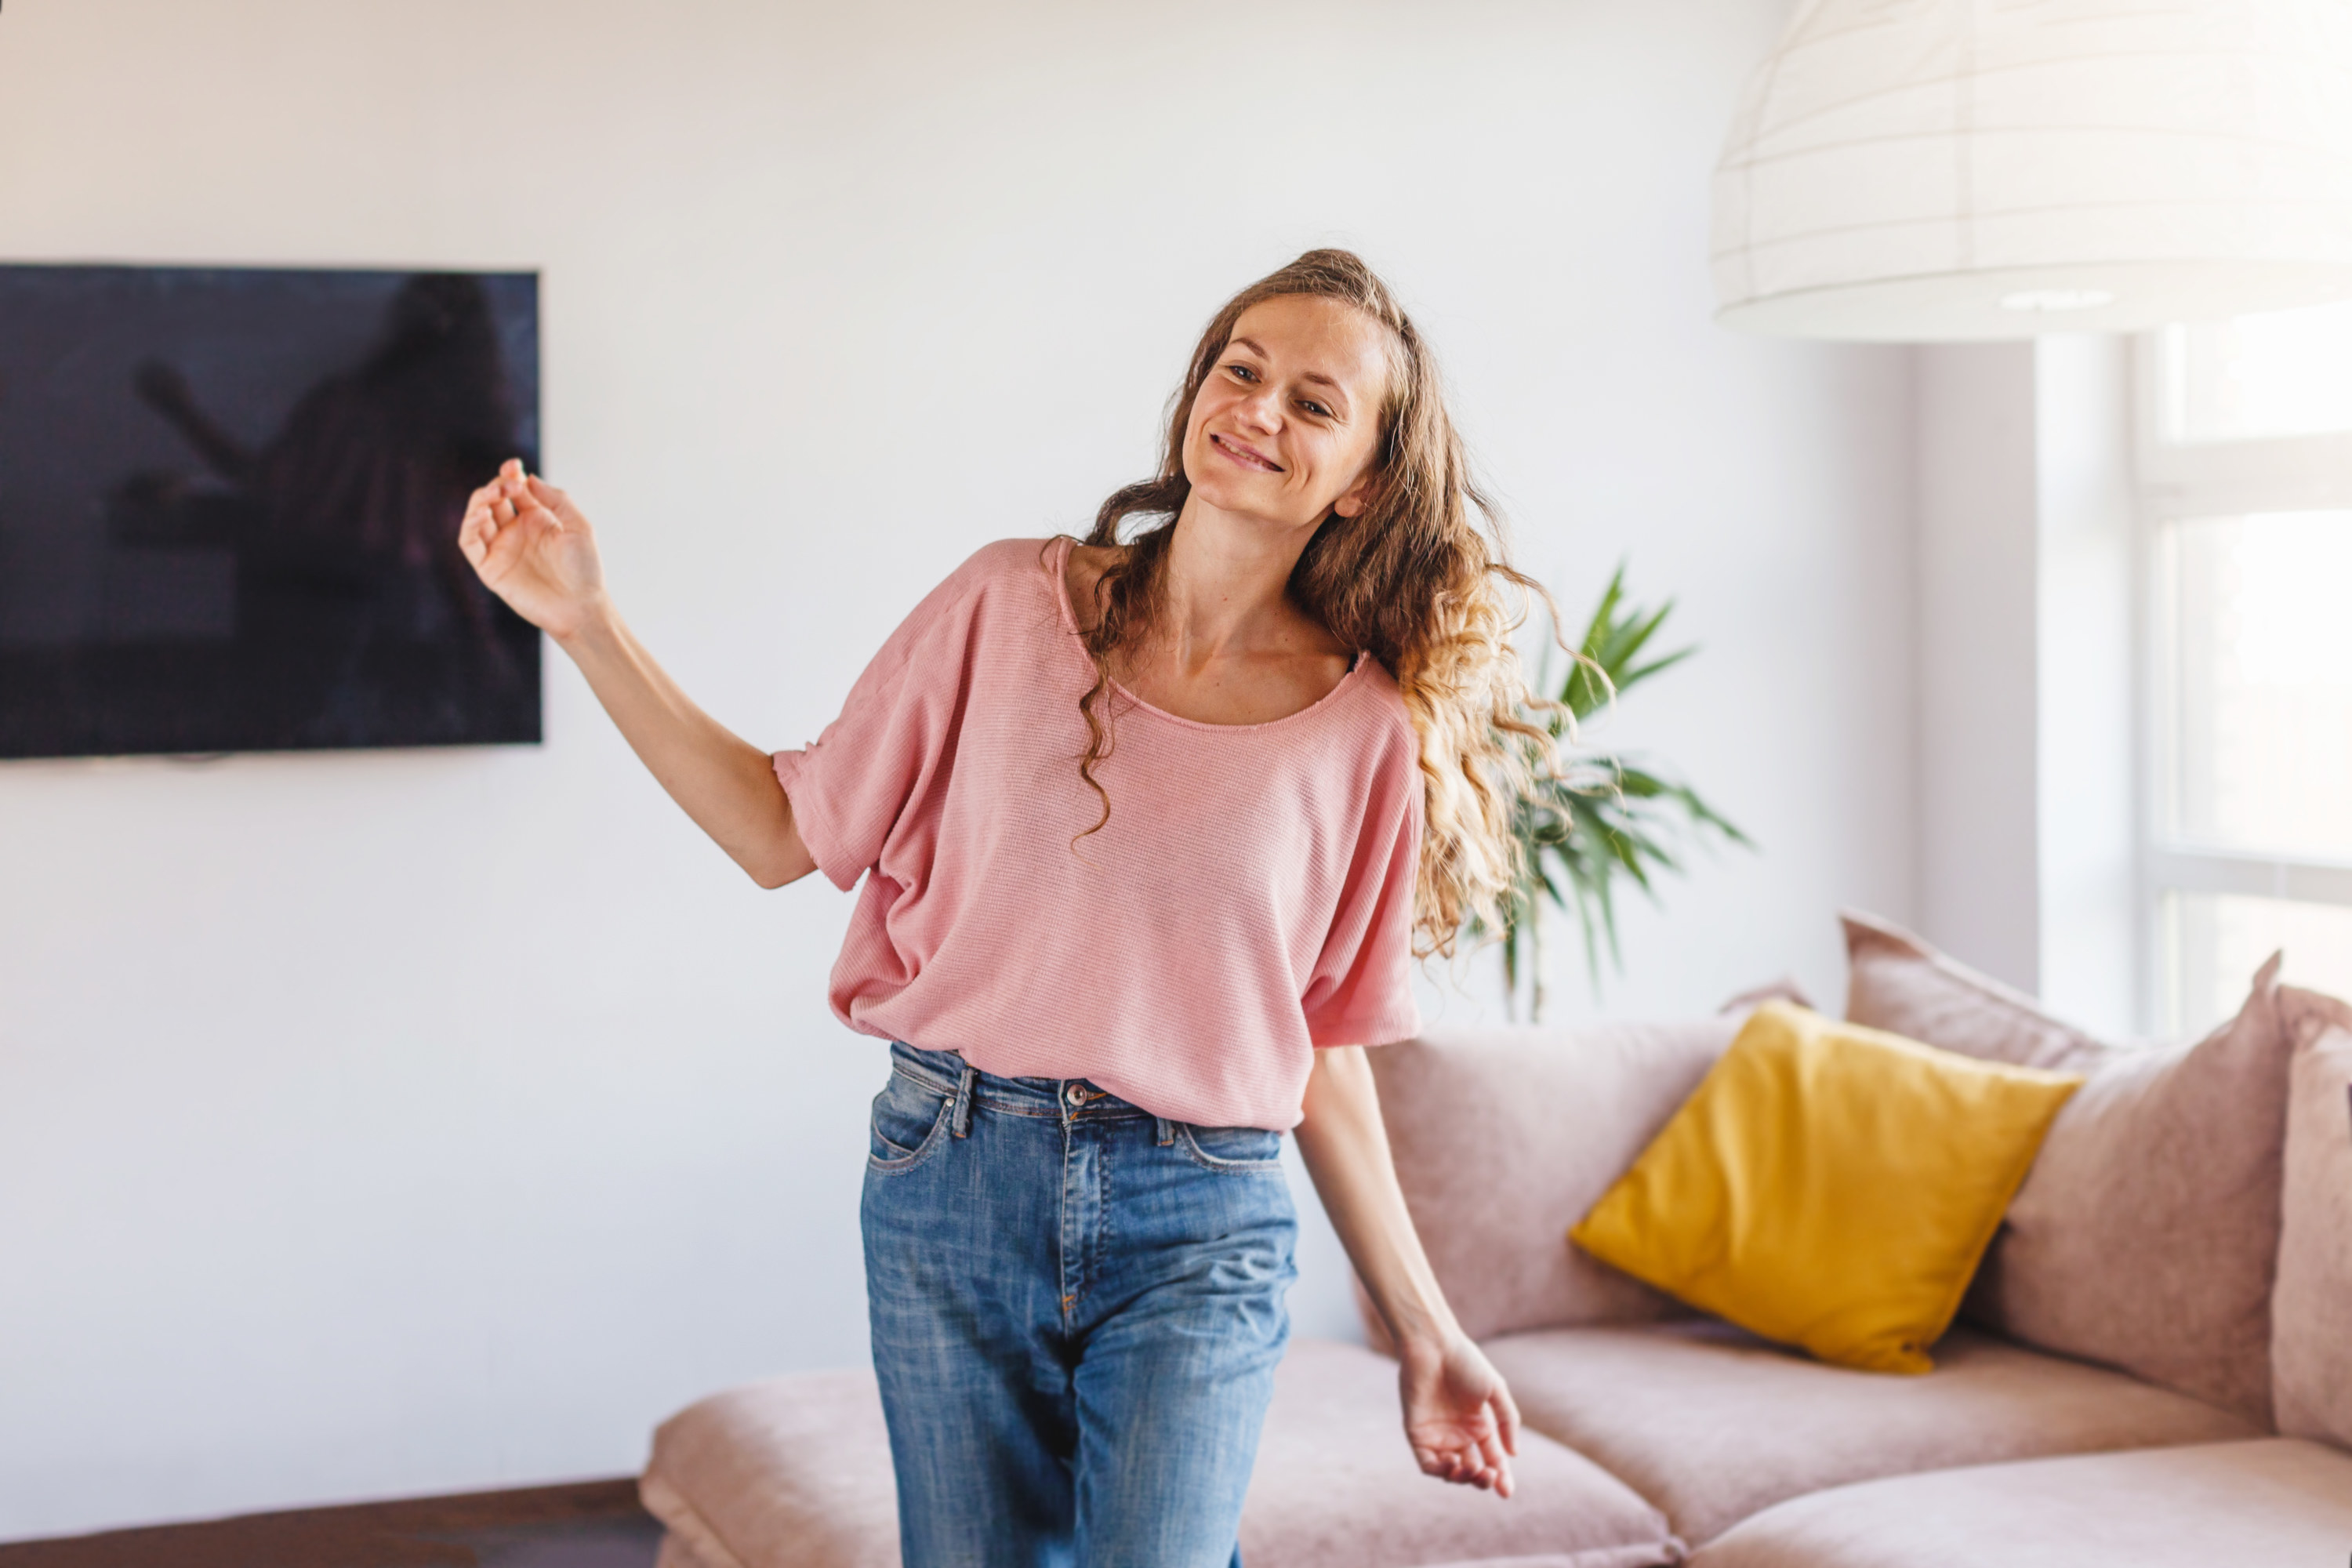 A girl in a pink shirt dances alone in her living room